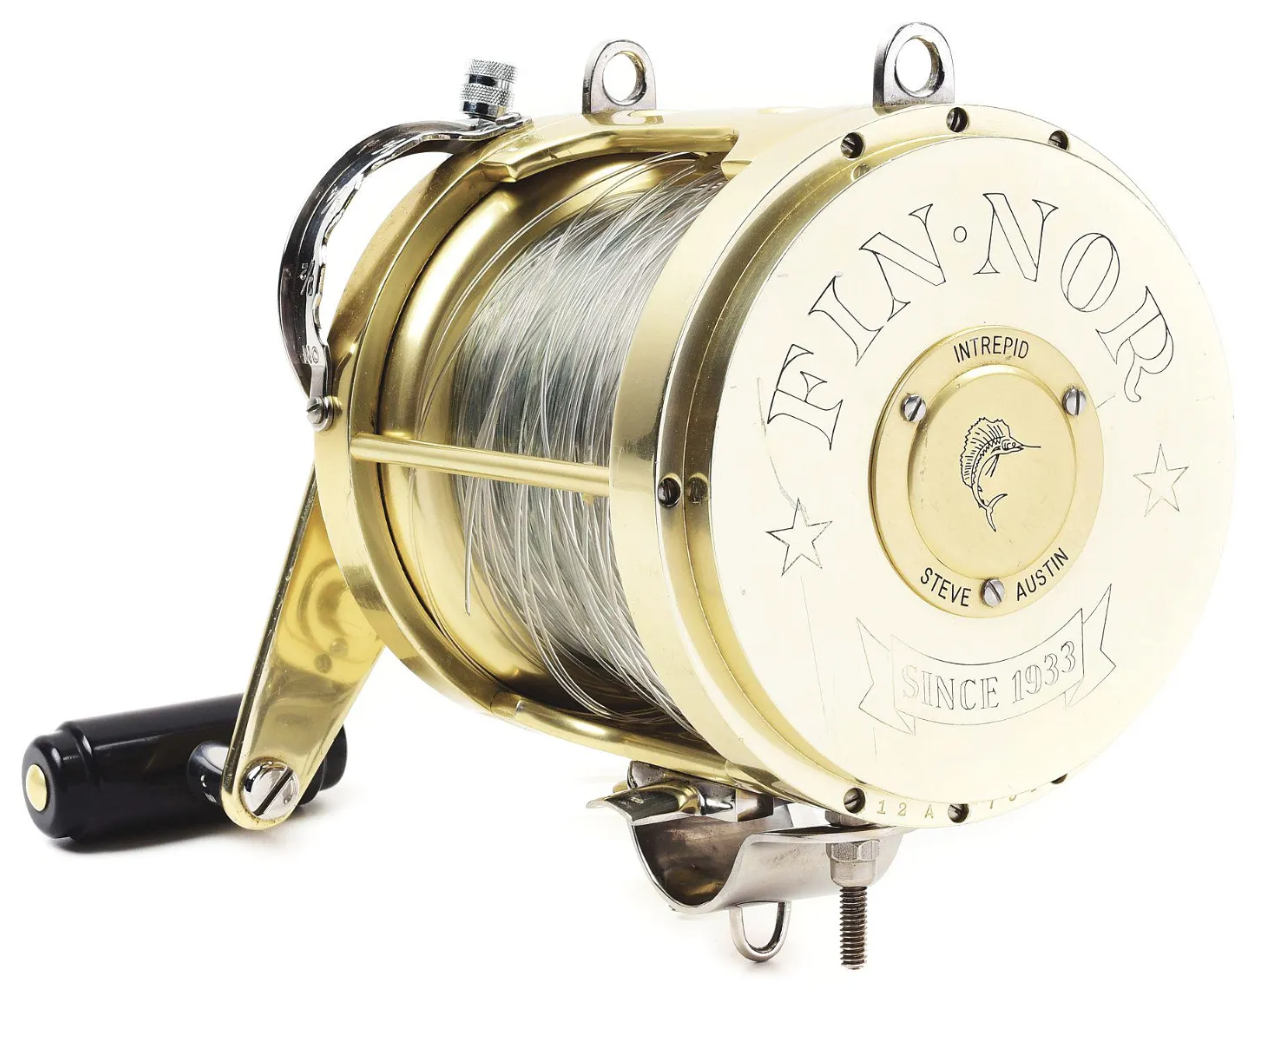 A Tycoon-Fin-Nor big game deep sea fishing reel for trolling, size 12/0, in brass, sold for $850 plus the buyer’s premium in March 2022. Image courtesy of Dan Morphy Auctions and LiveAuctioneers.